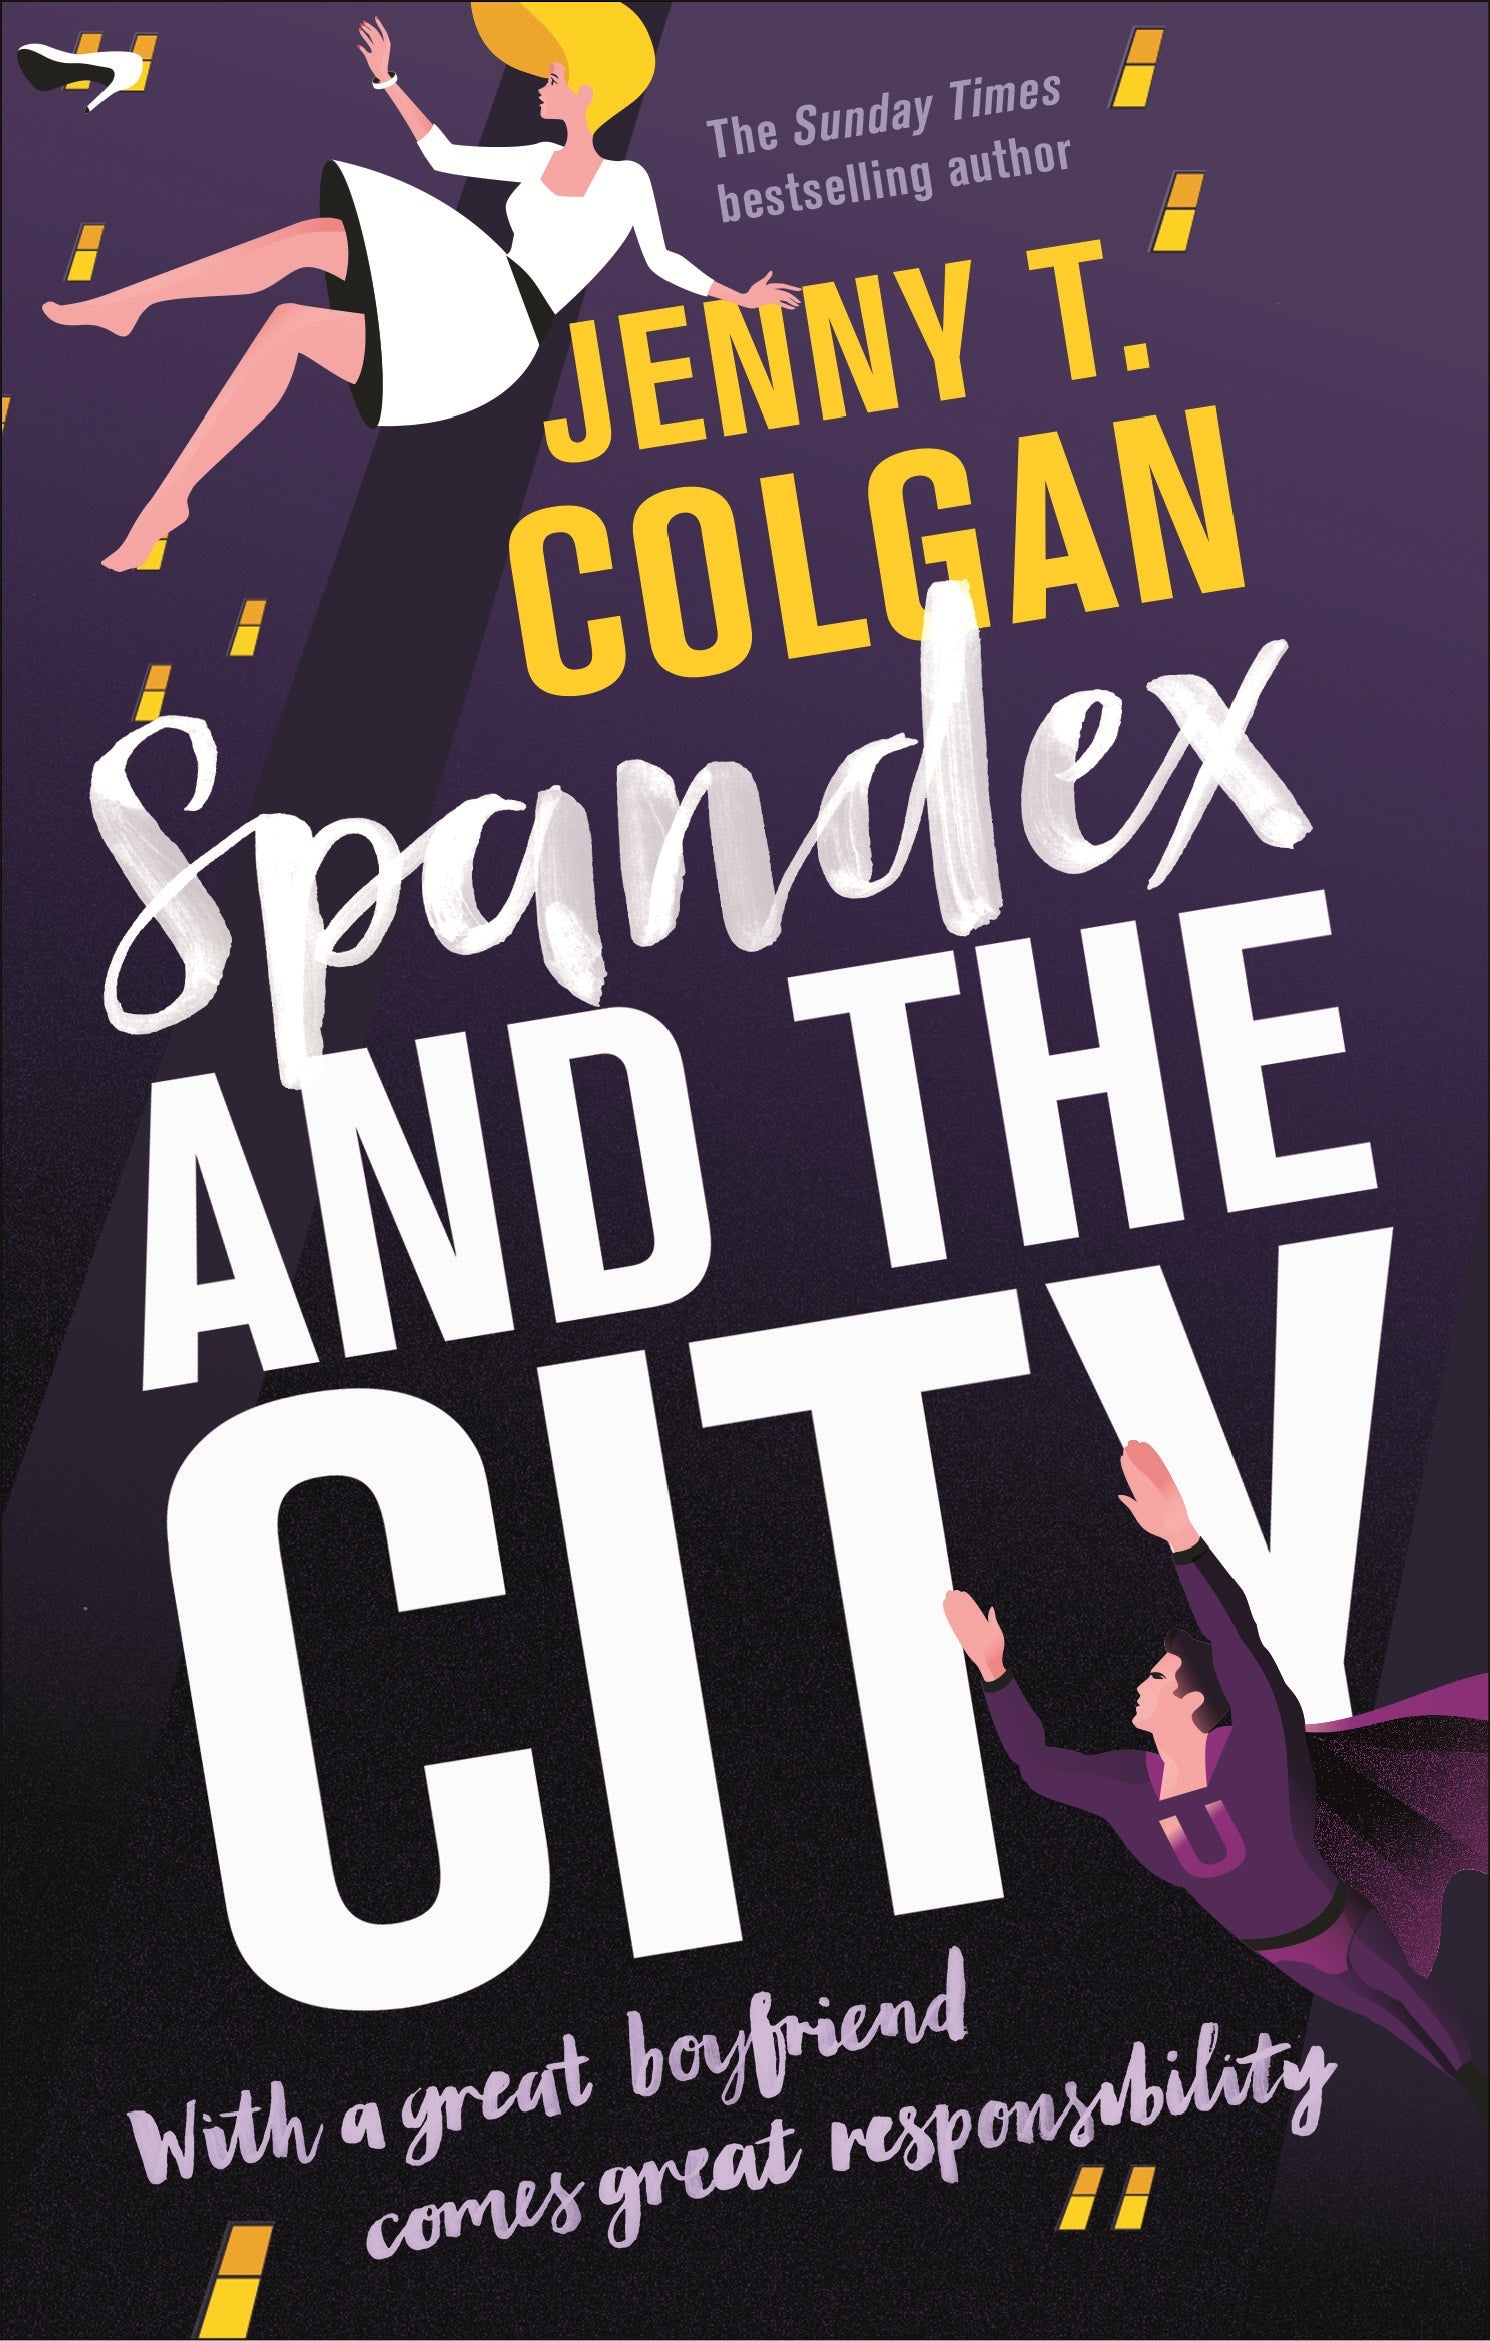 Spandex and the City by Jenny T. Colgan